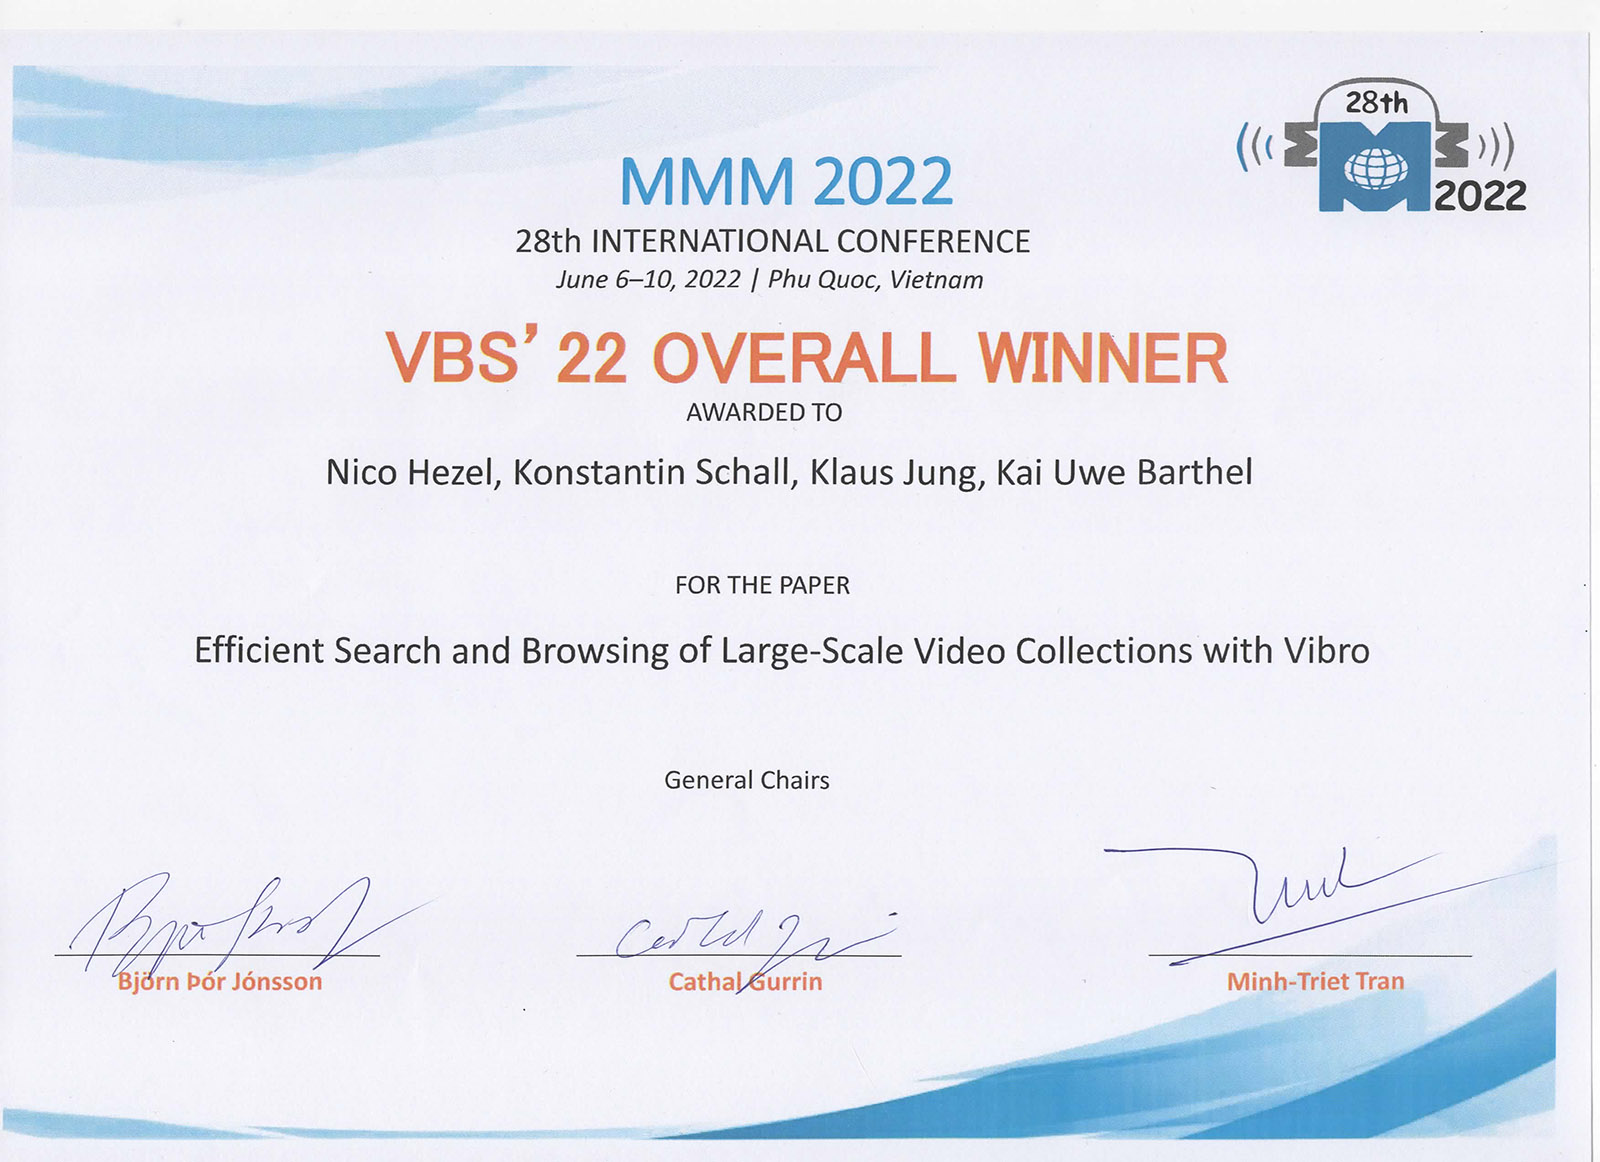 Award for the best video Browser 'Vibro' in 2022